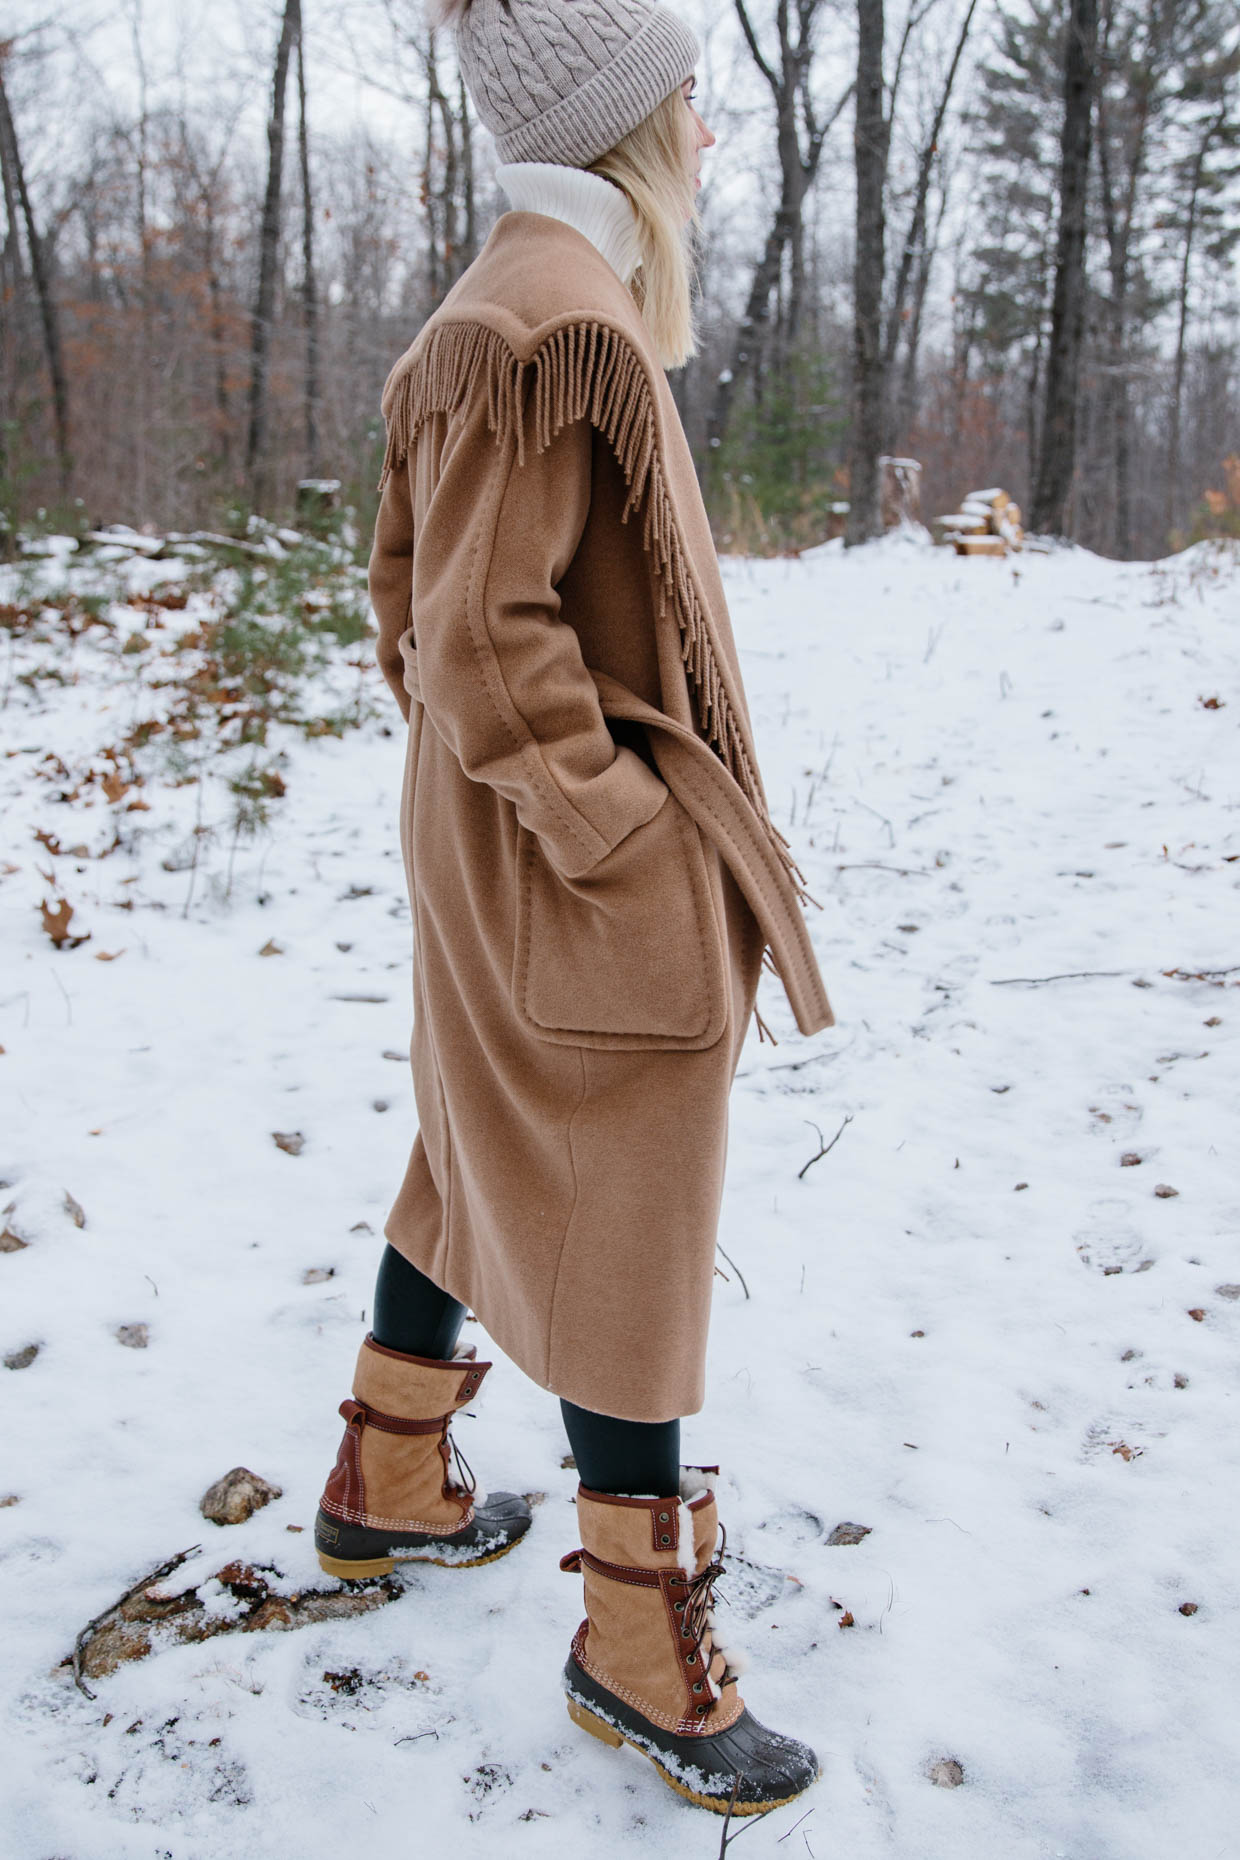 Snow Day in the Woods: Fringe Coat with Faux Leather Leggings